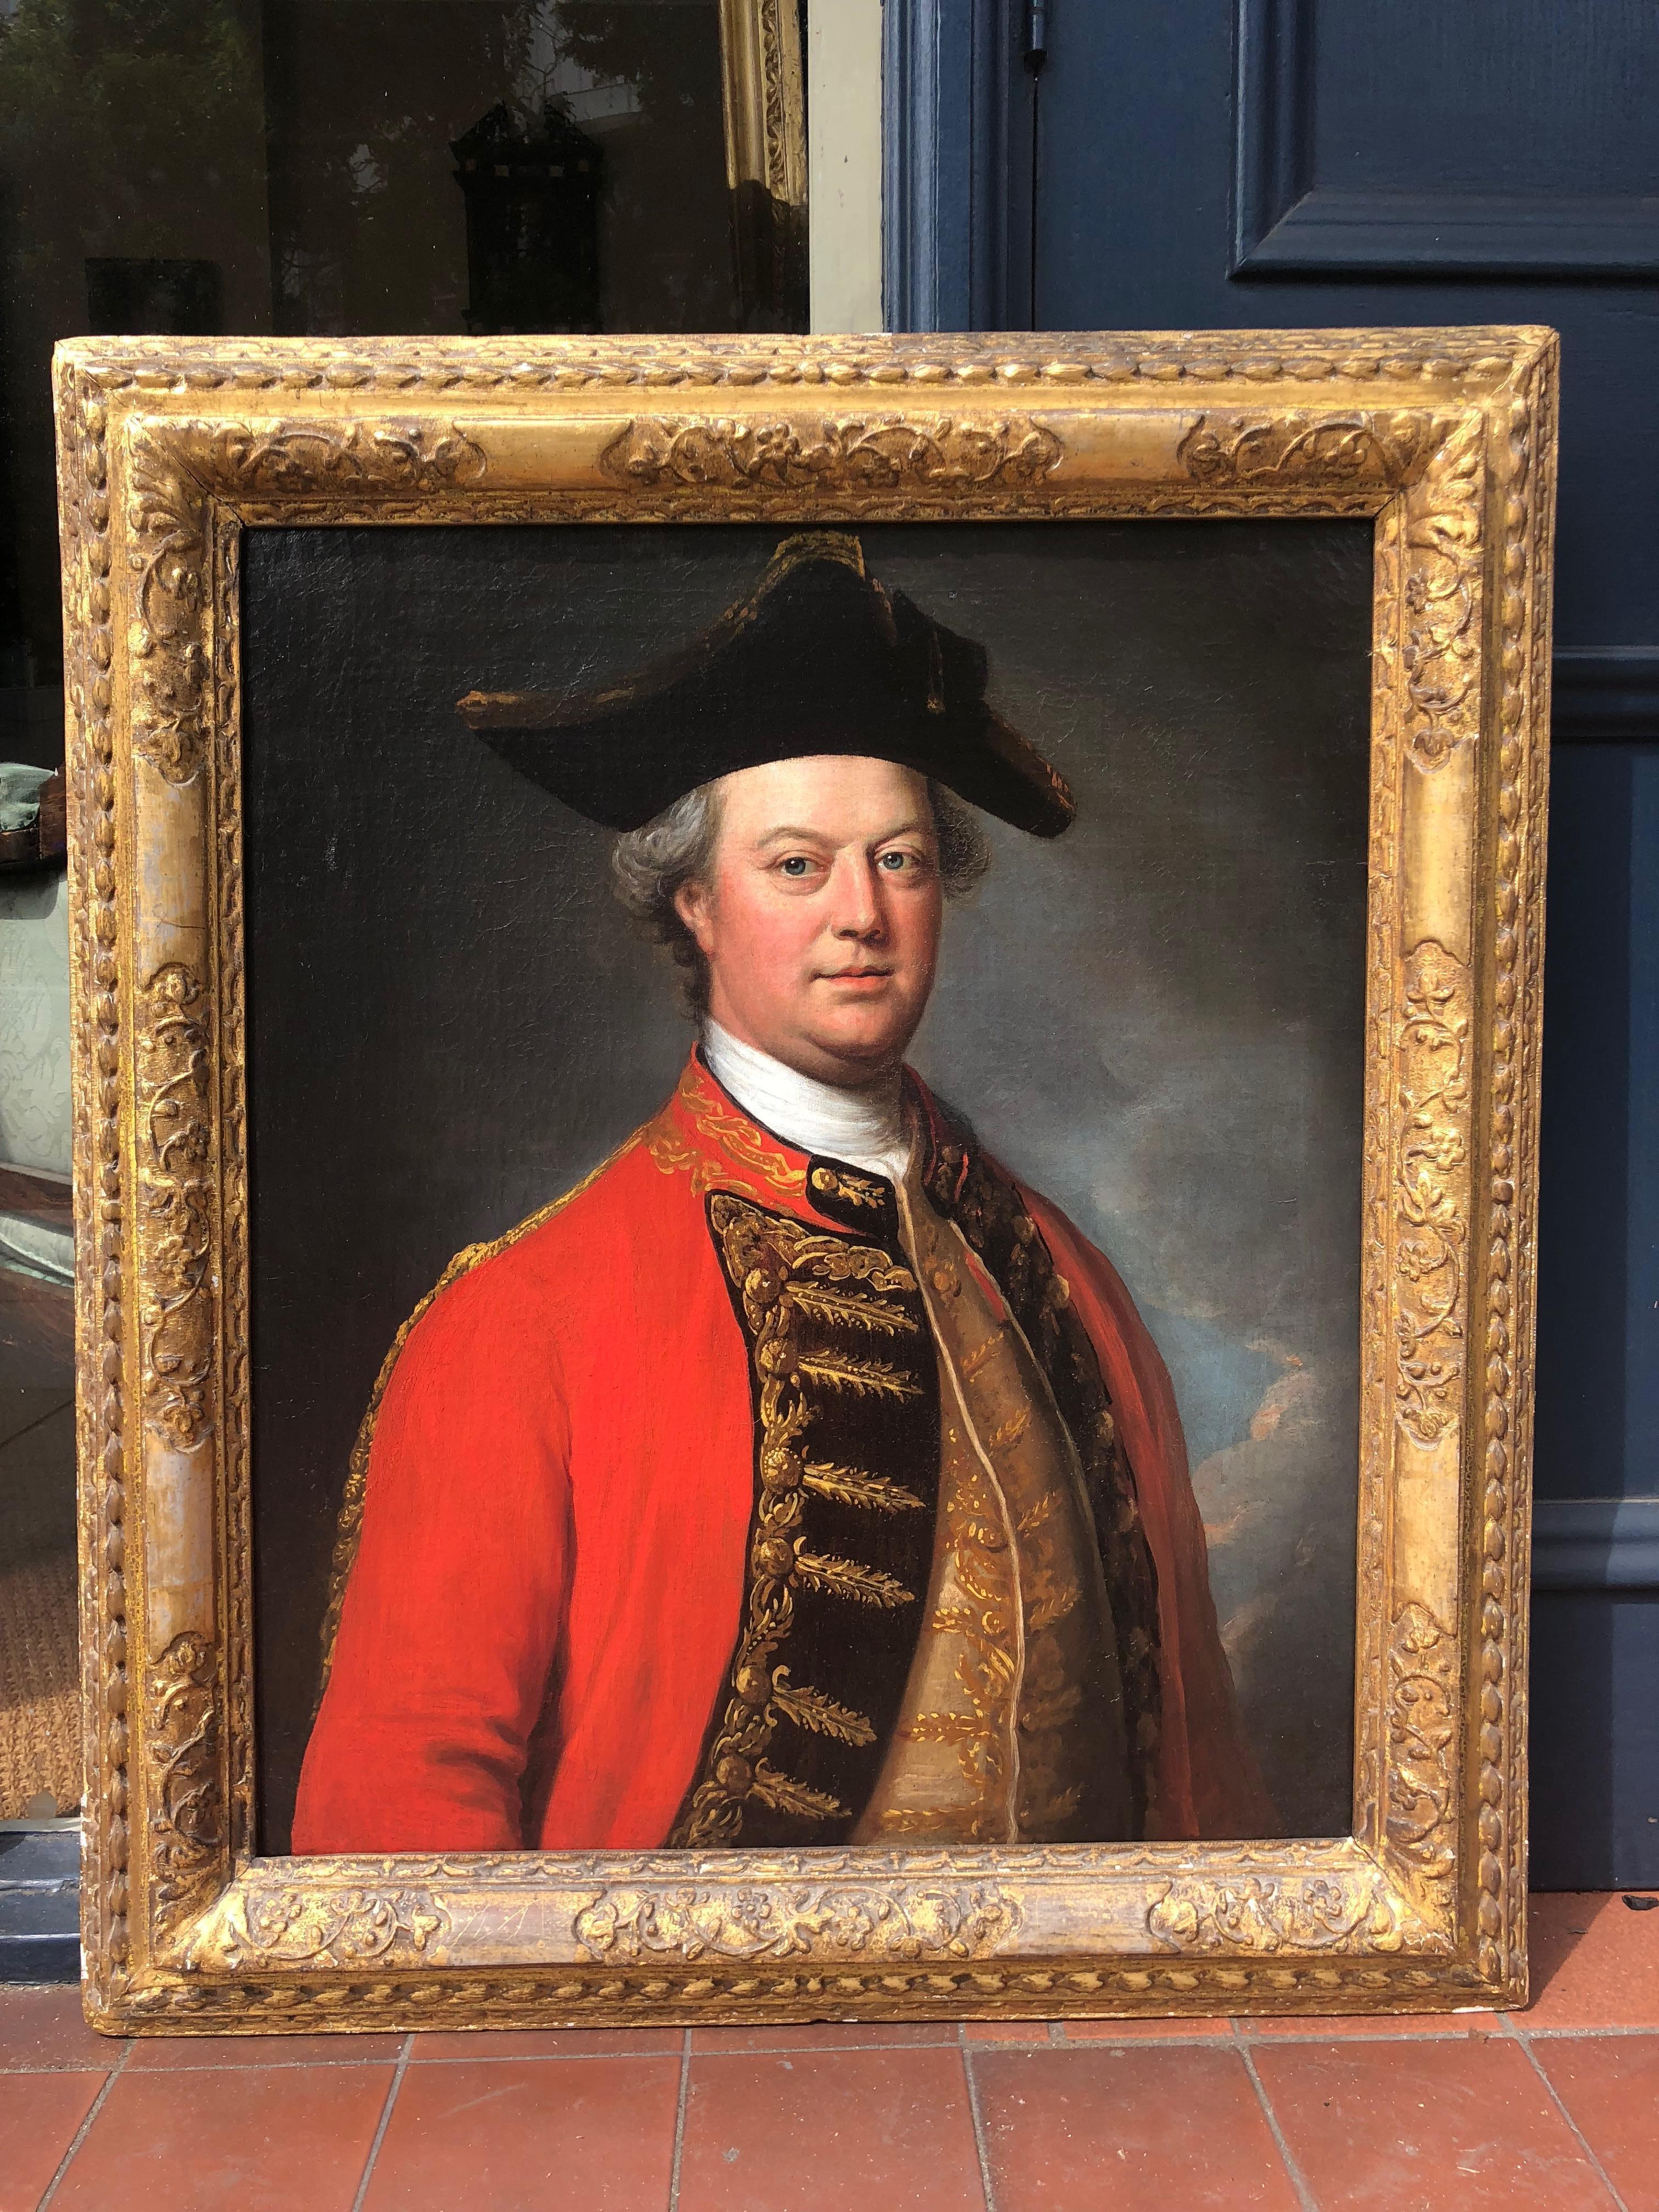 Sir Nathaniel DANCE-HOLLAND, 1st Baronet RA (1735-1811)
Portrait of an Officer of the 4th Irish Horse
c. 1755-58
Oil on Canvas
36 ½  x 32 inches framed

This majestic portrait was painted by Nathaniel Dance-Holland, one of King George III’s